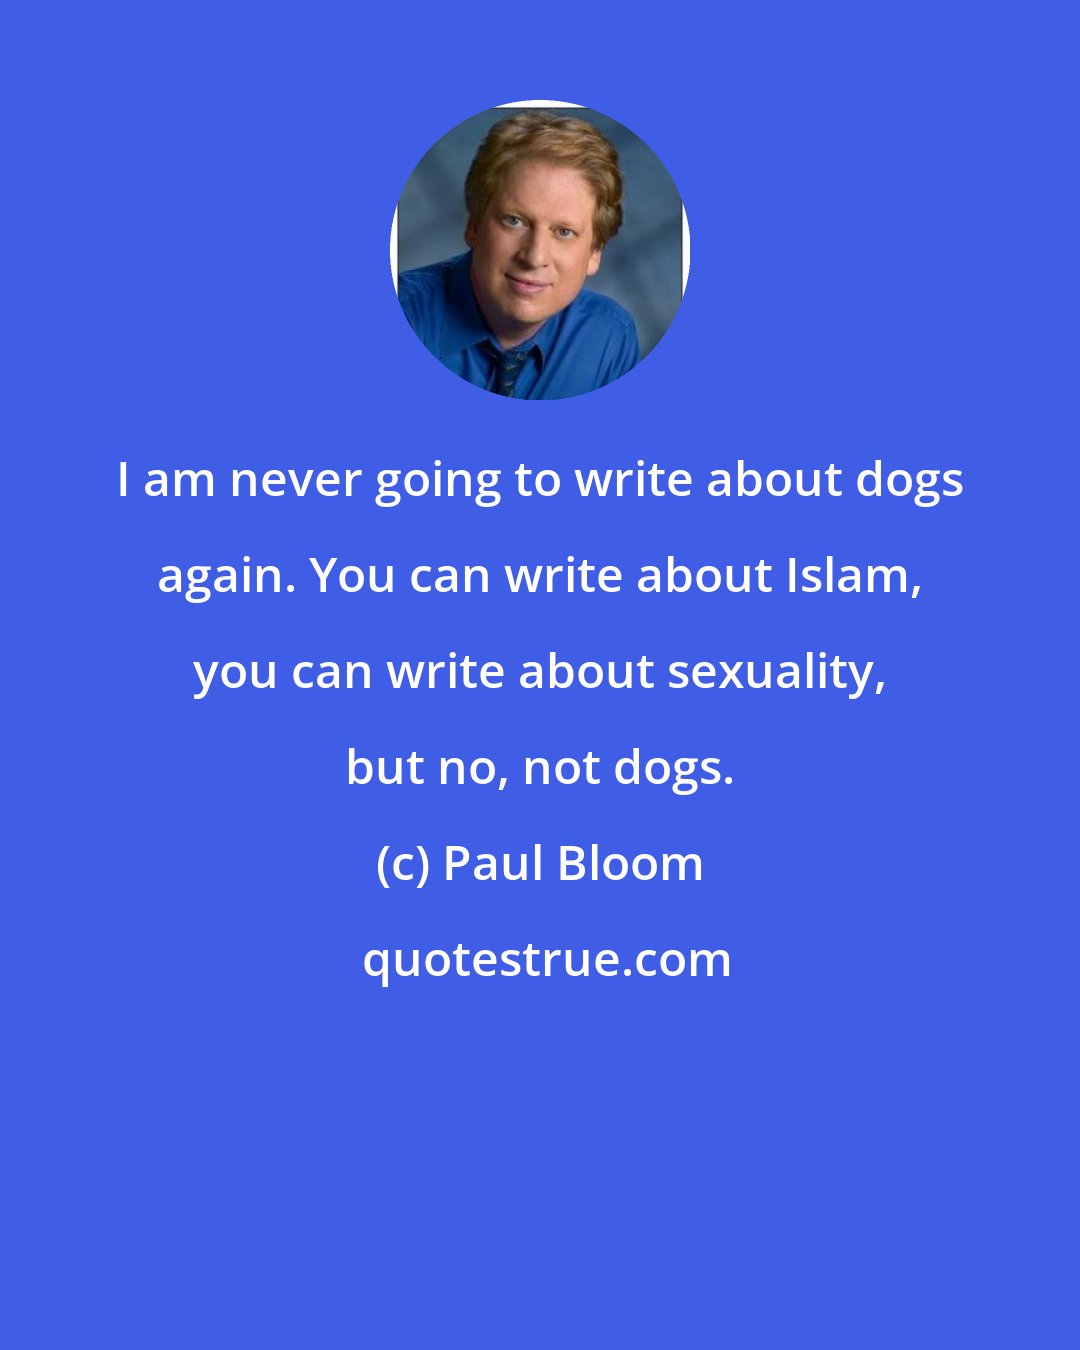 Paul Bloom: I am never going to write about dogs again. You can write about Islam, you can write about sexuality, but no, not dogs.